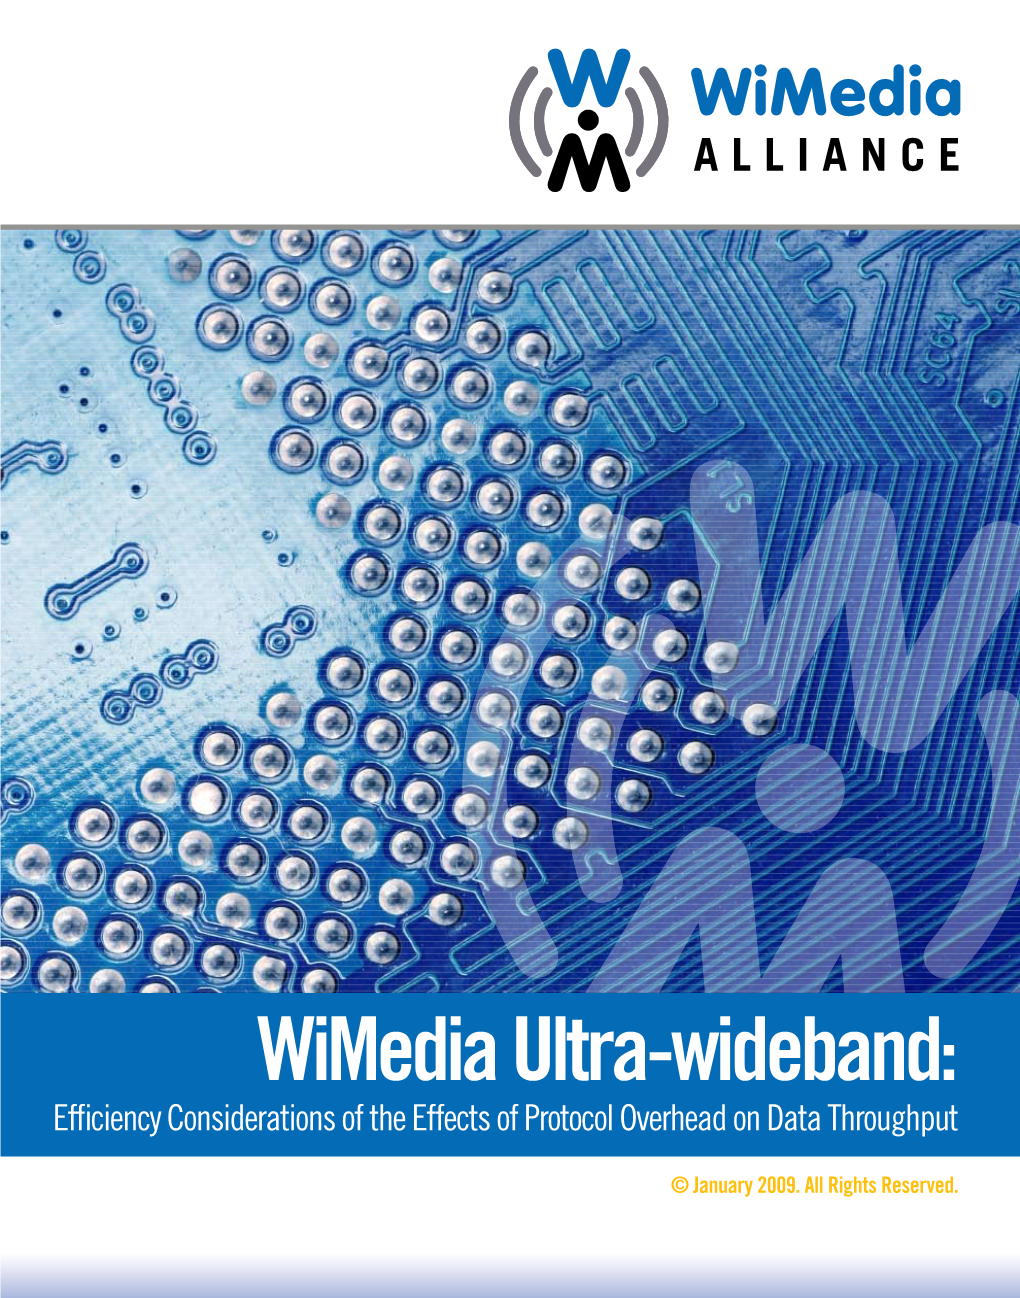 Wimedia Ultra-Wideband: Efficiency Considerations of the Effects of Protocol Overhead on Data Throughput